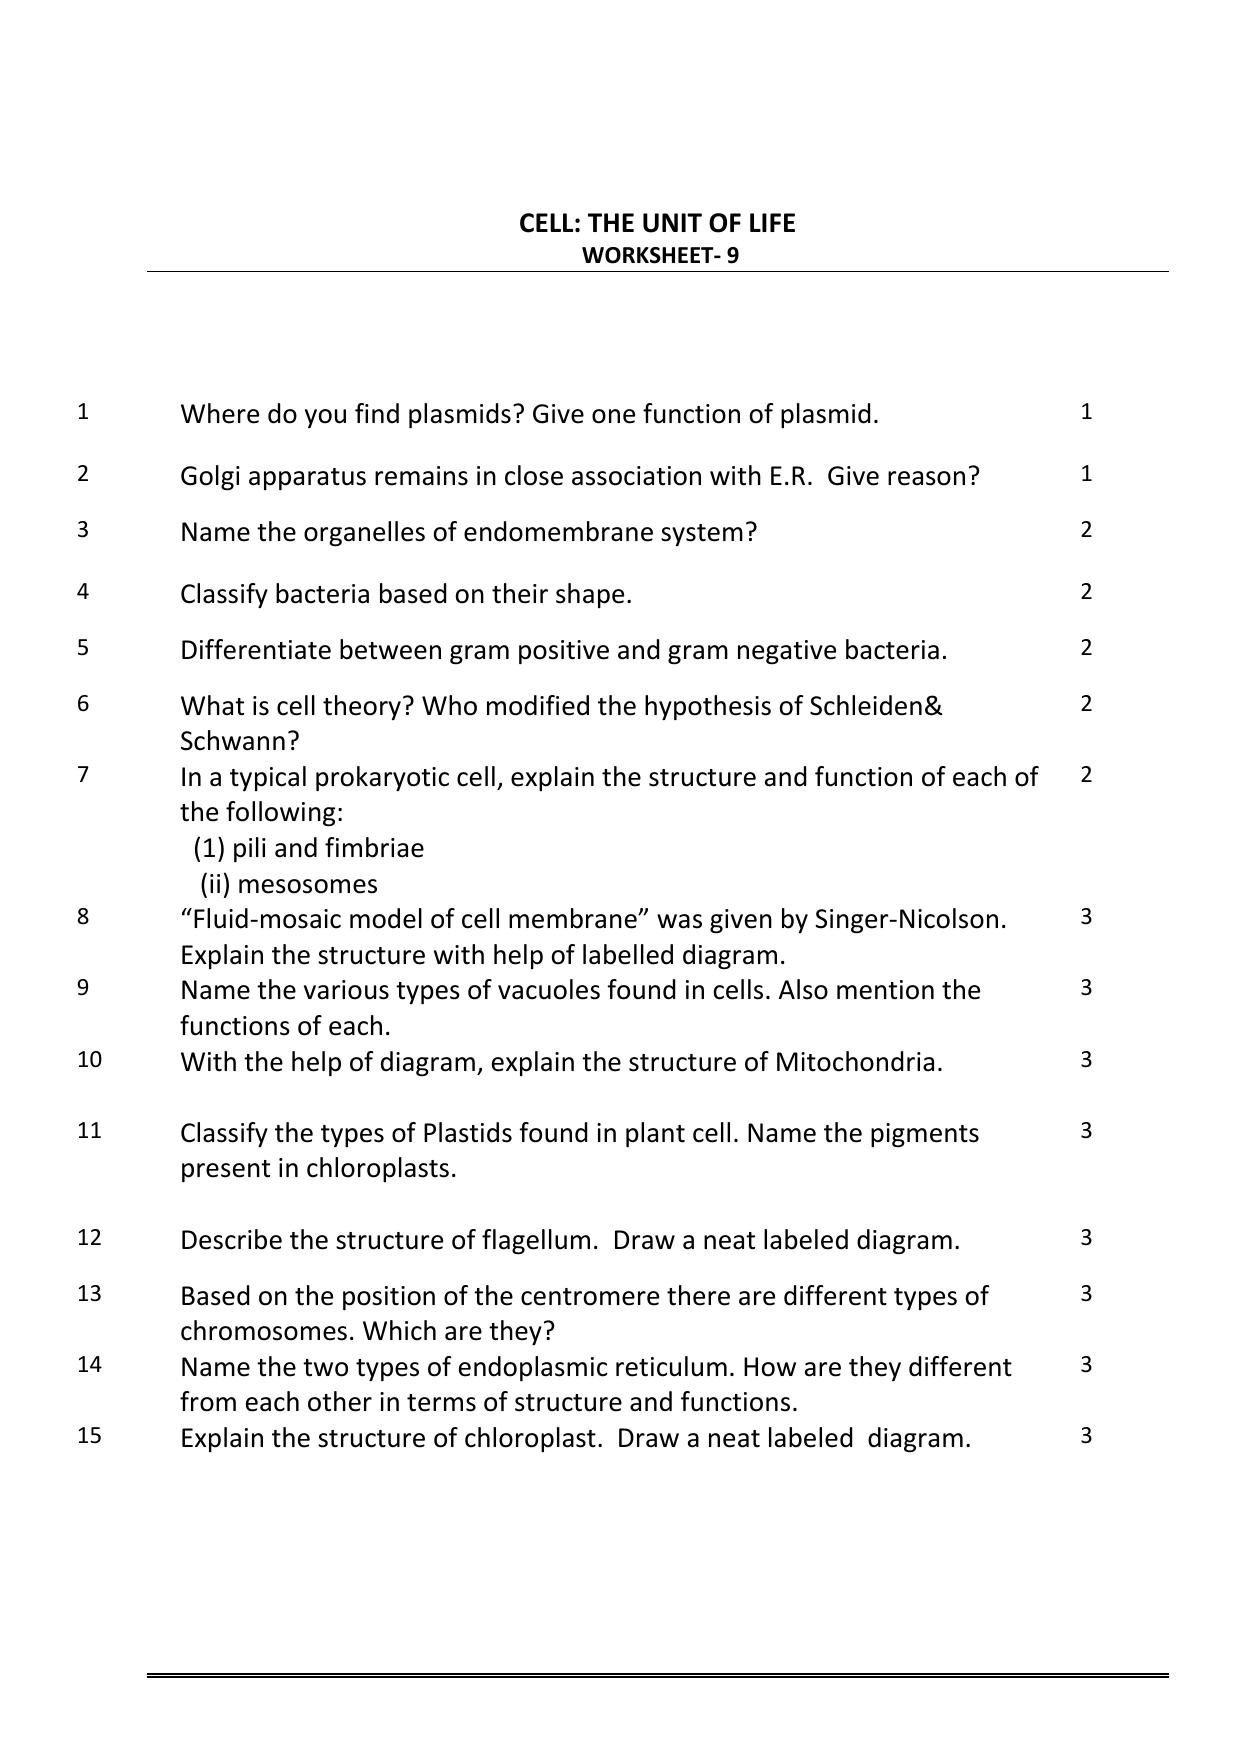 CBSE Worksheets for Class 11 Biology Cell-The Unit of Life Assignment - Page 1